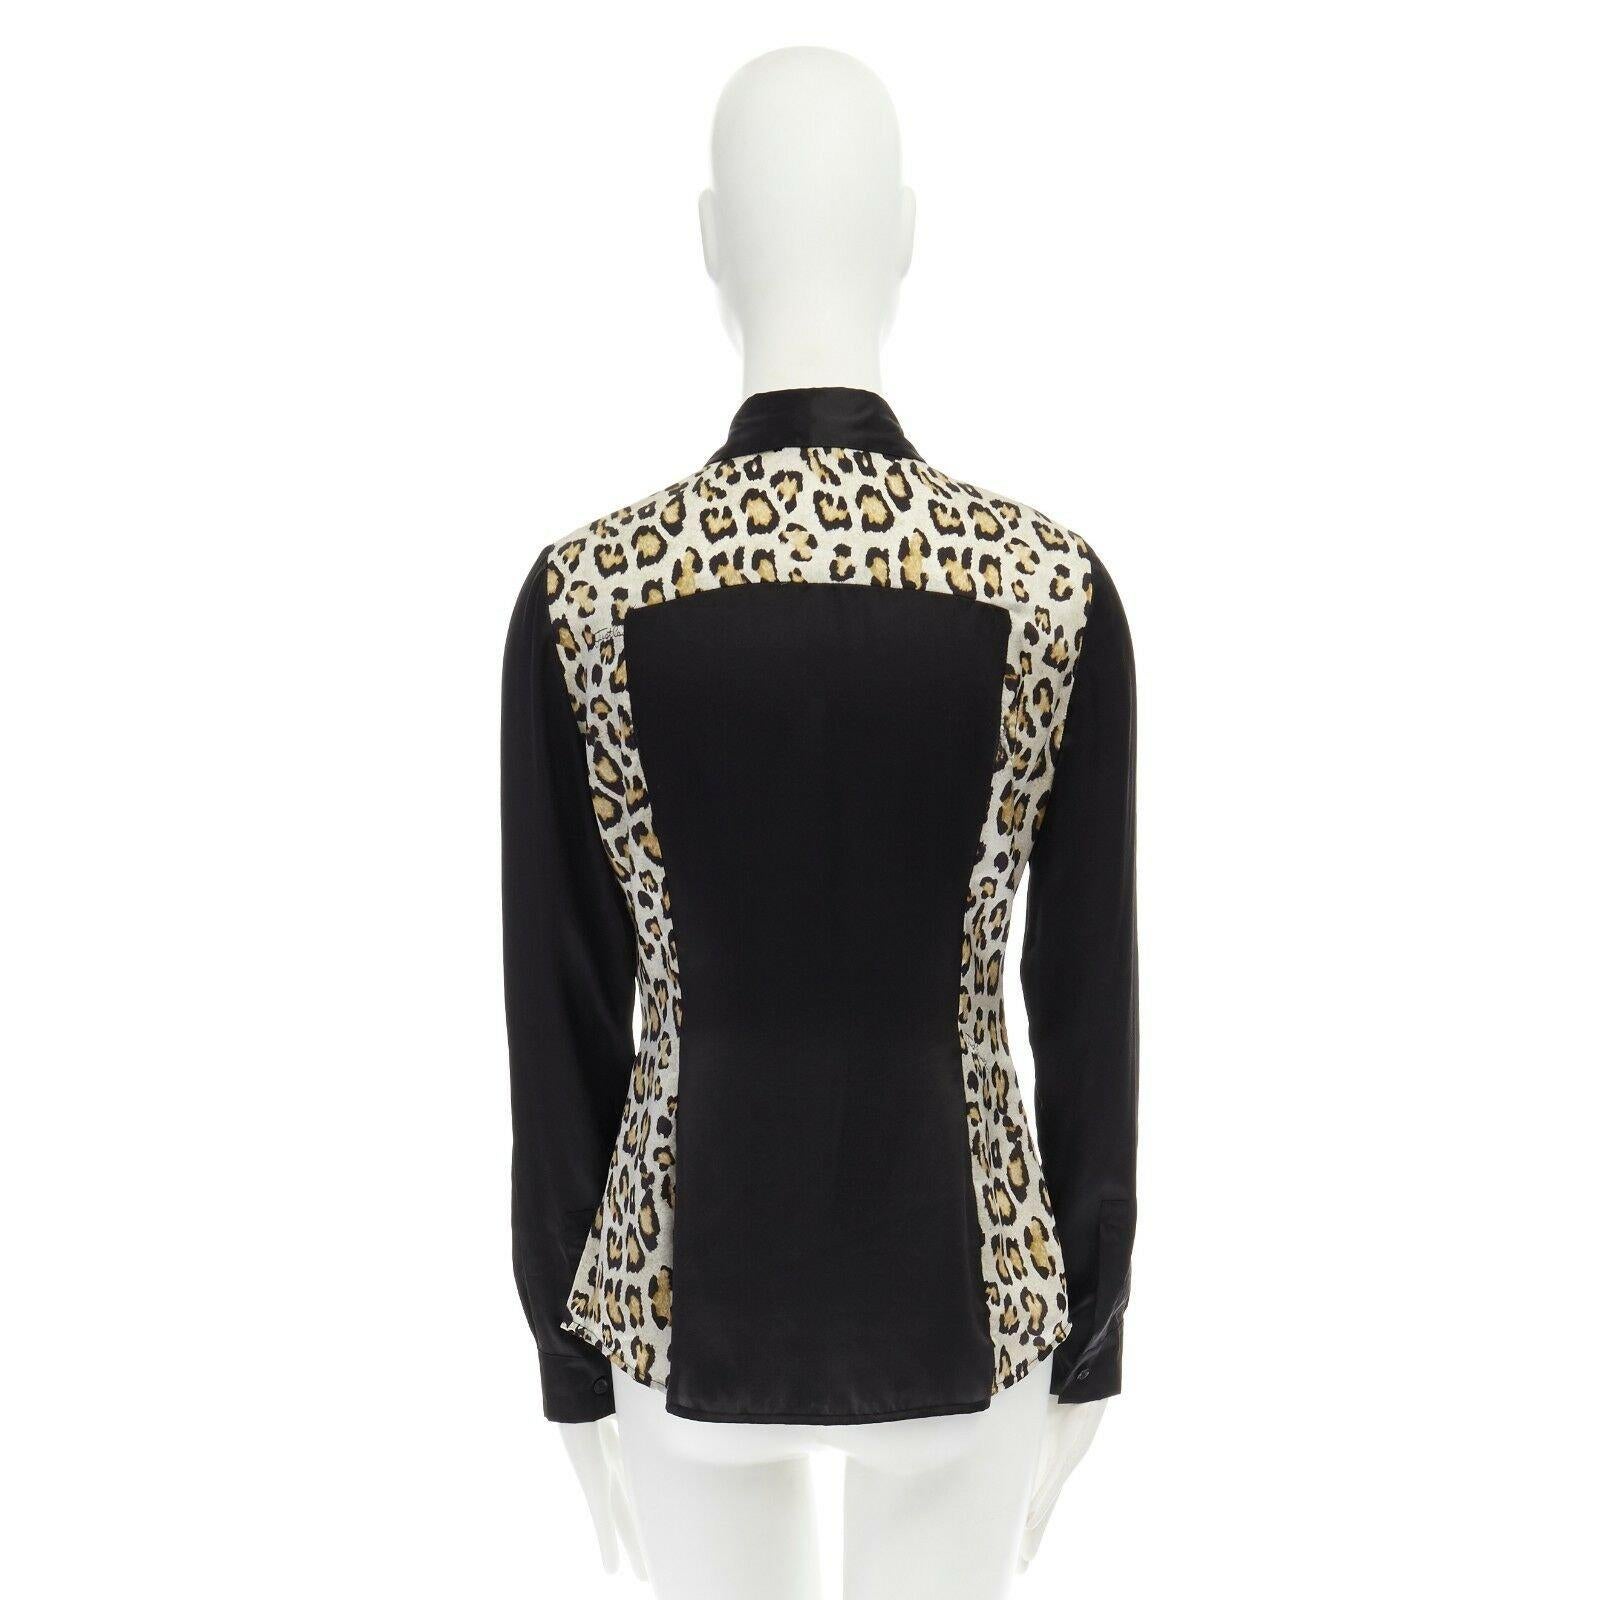 JUST CAVALLI 100% silk black leopard colorblocked button front shirt IT40 S In Good Condition For Sale In Hong Kong, NT